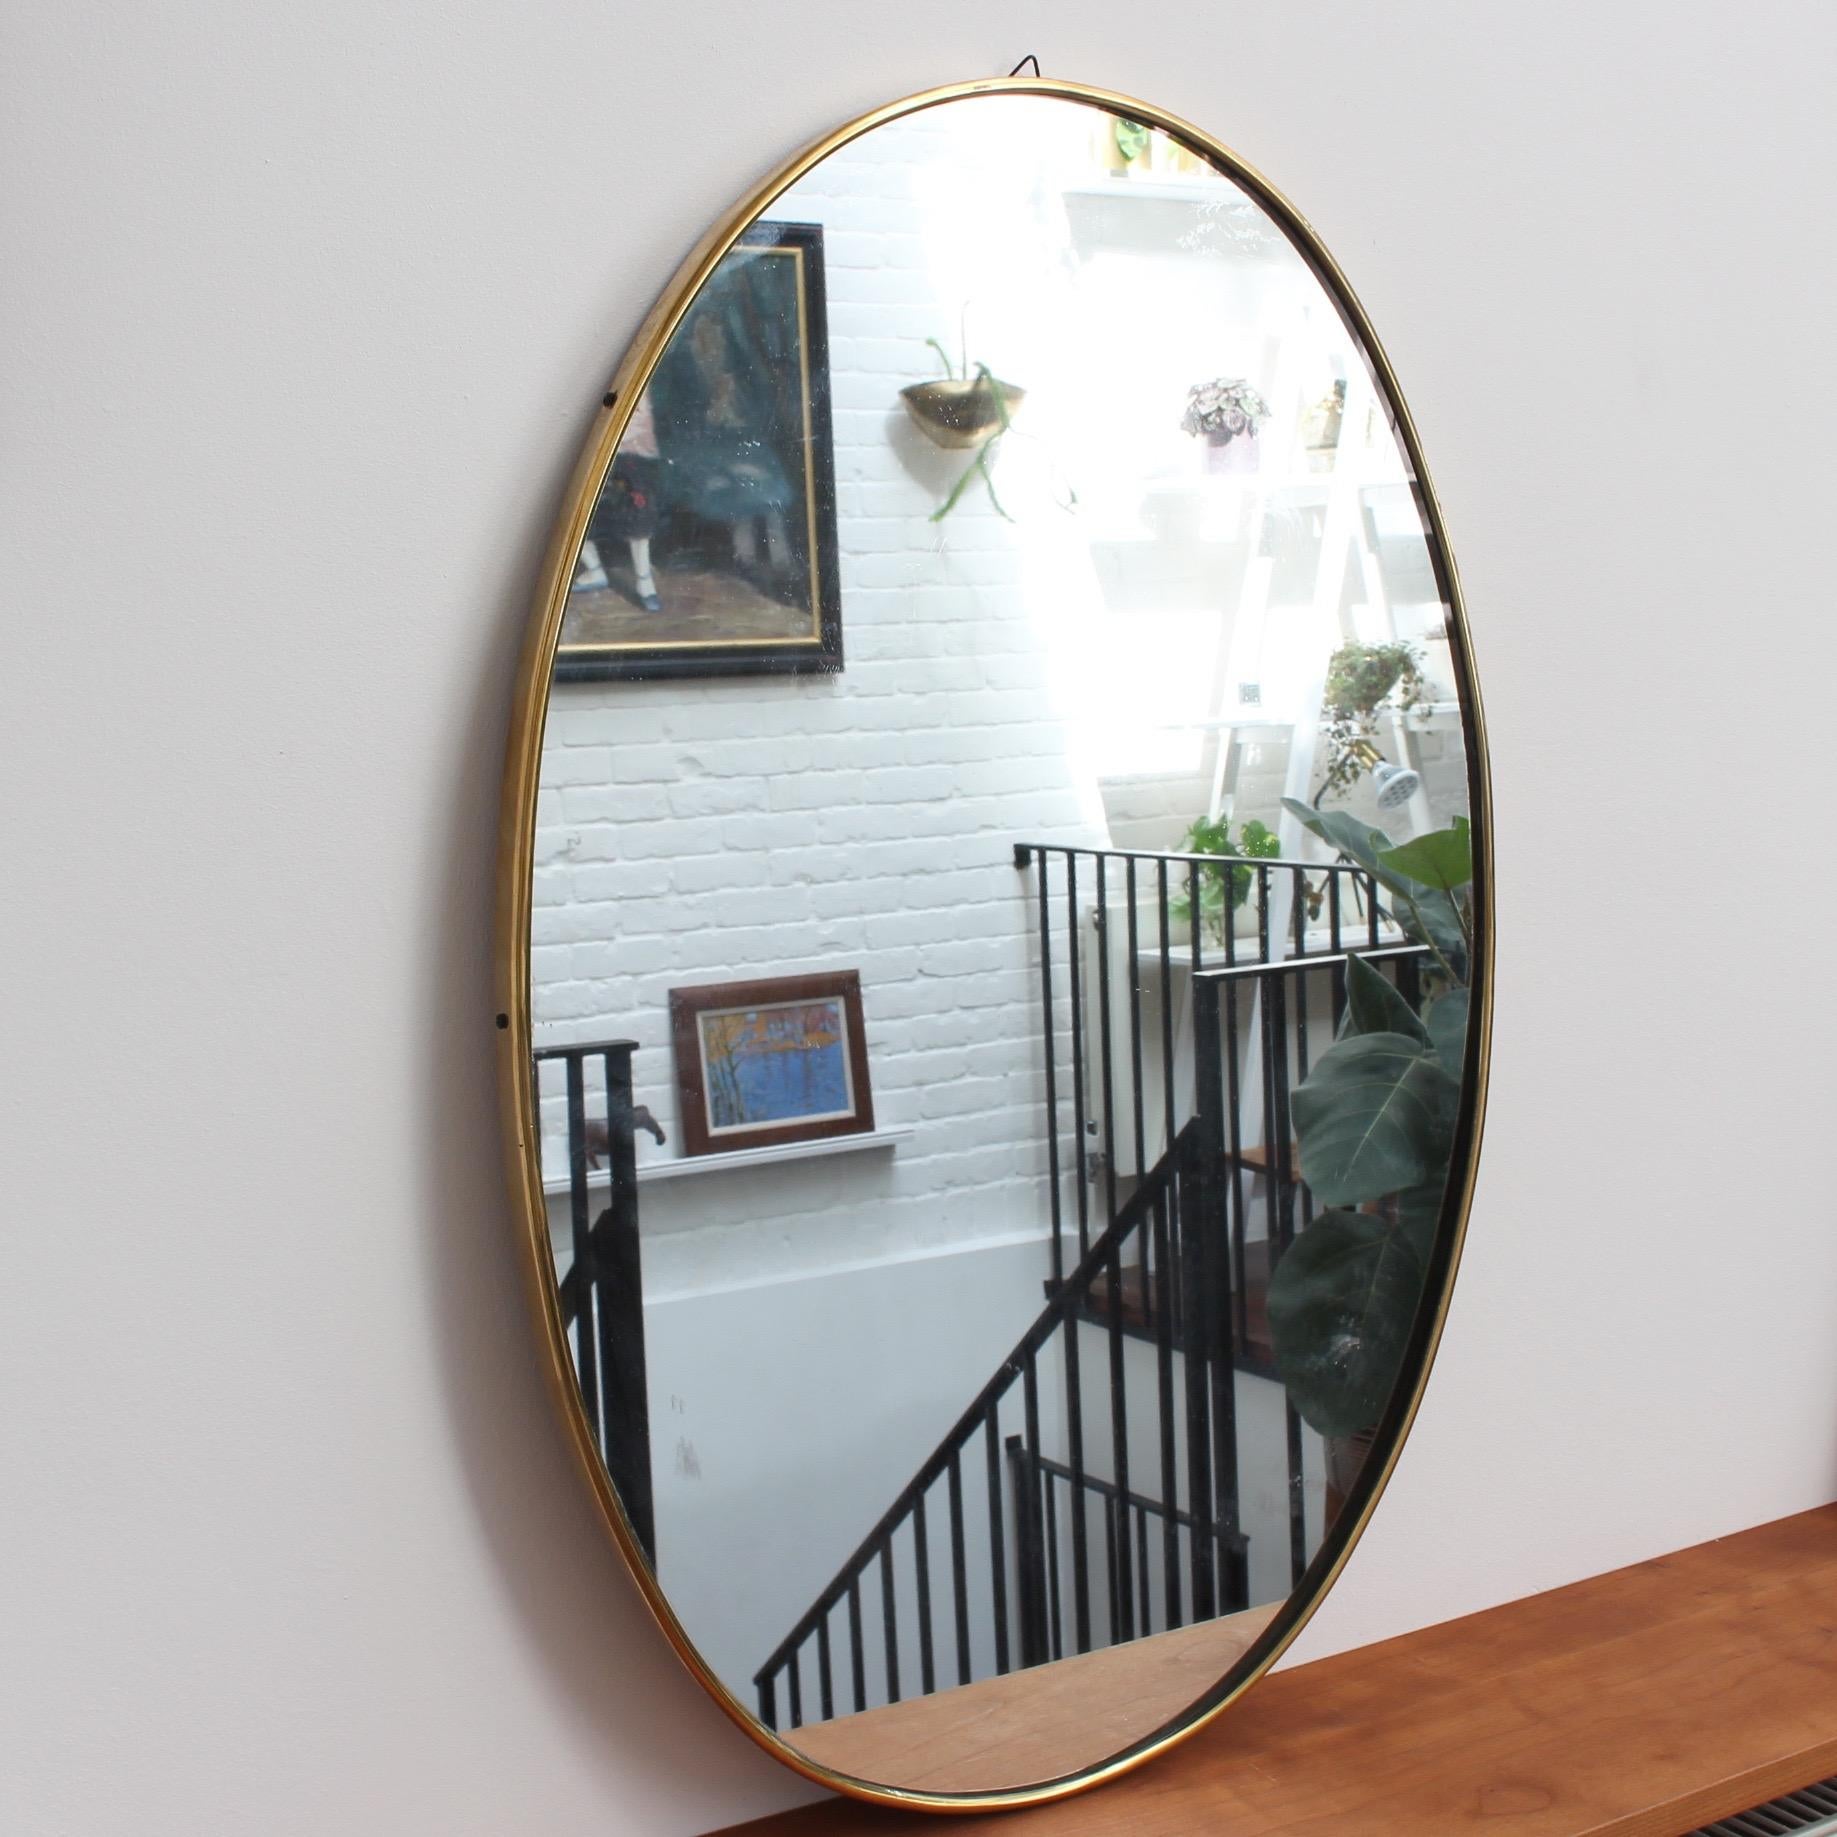 Midcentury Italian wall mirror with brass frame (circa 1950s). The mirror is beautifully oblong-shaped. Very elegant and distinctive in a modern Gio Ponti style. This mirror is in very good vintage condition. There are some characterful blemishes on